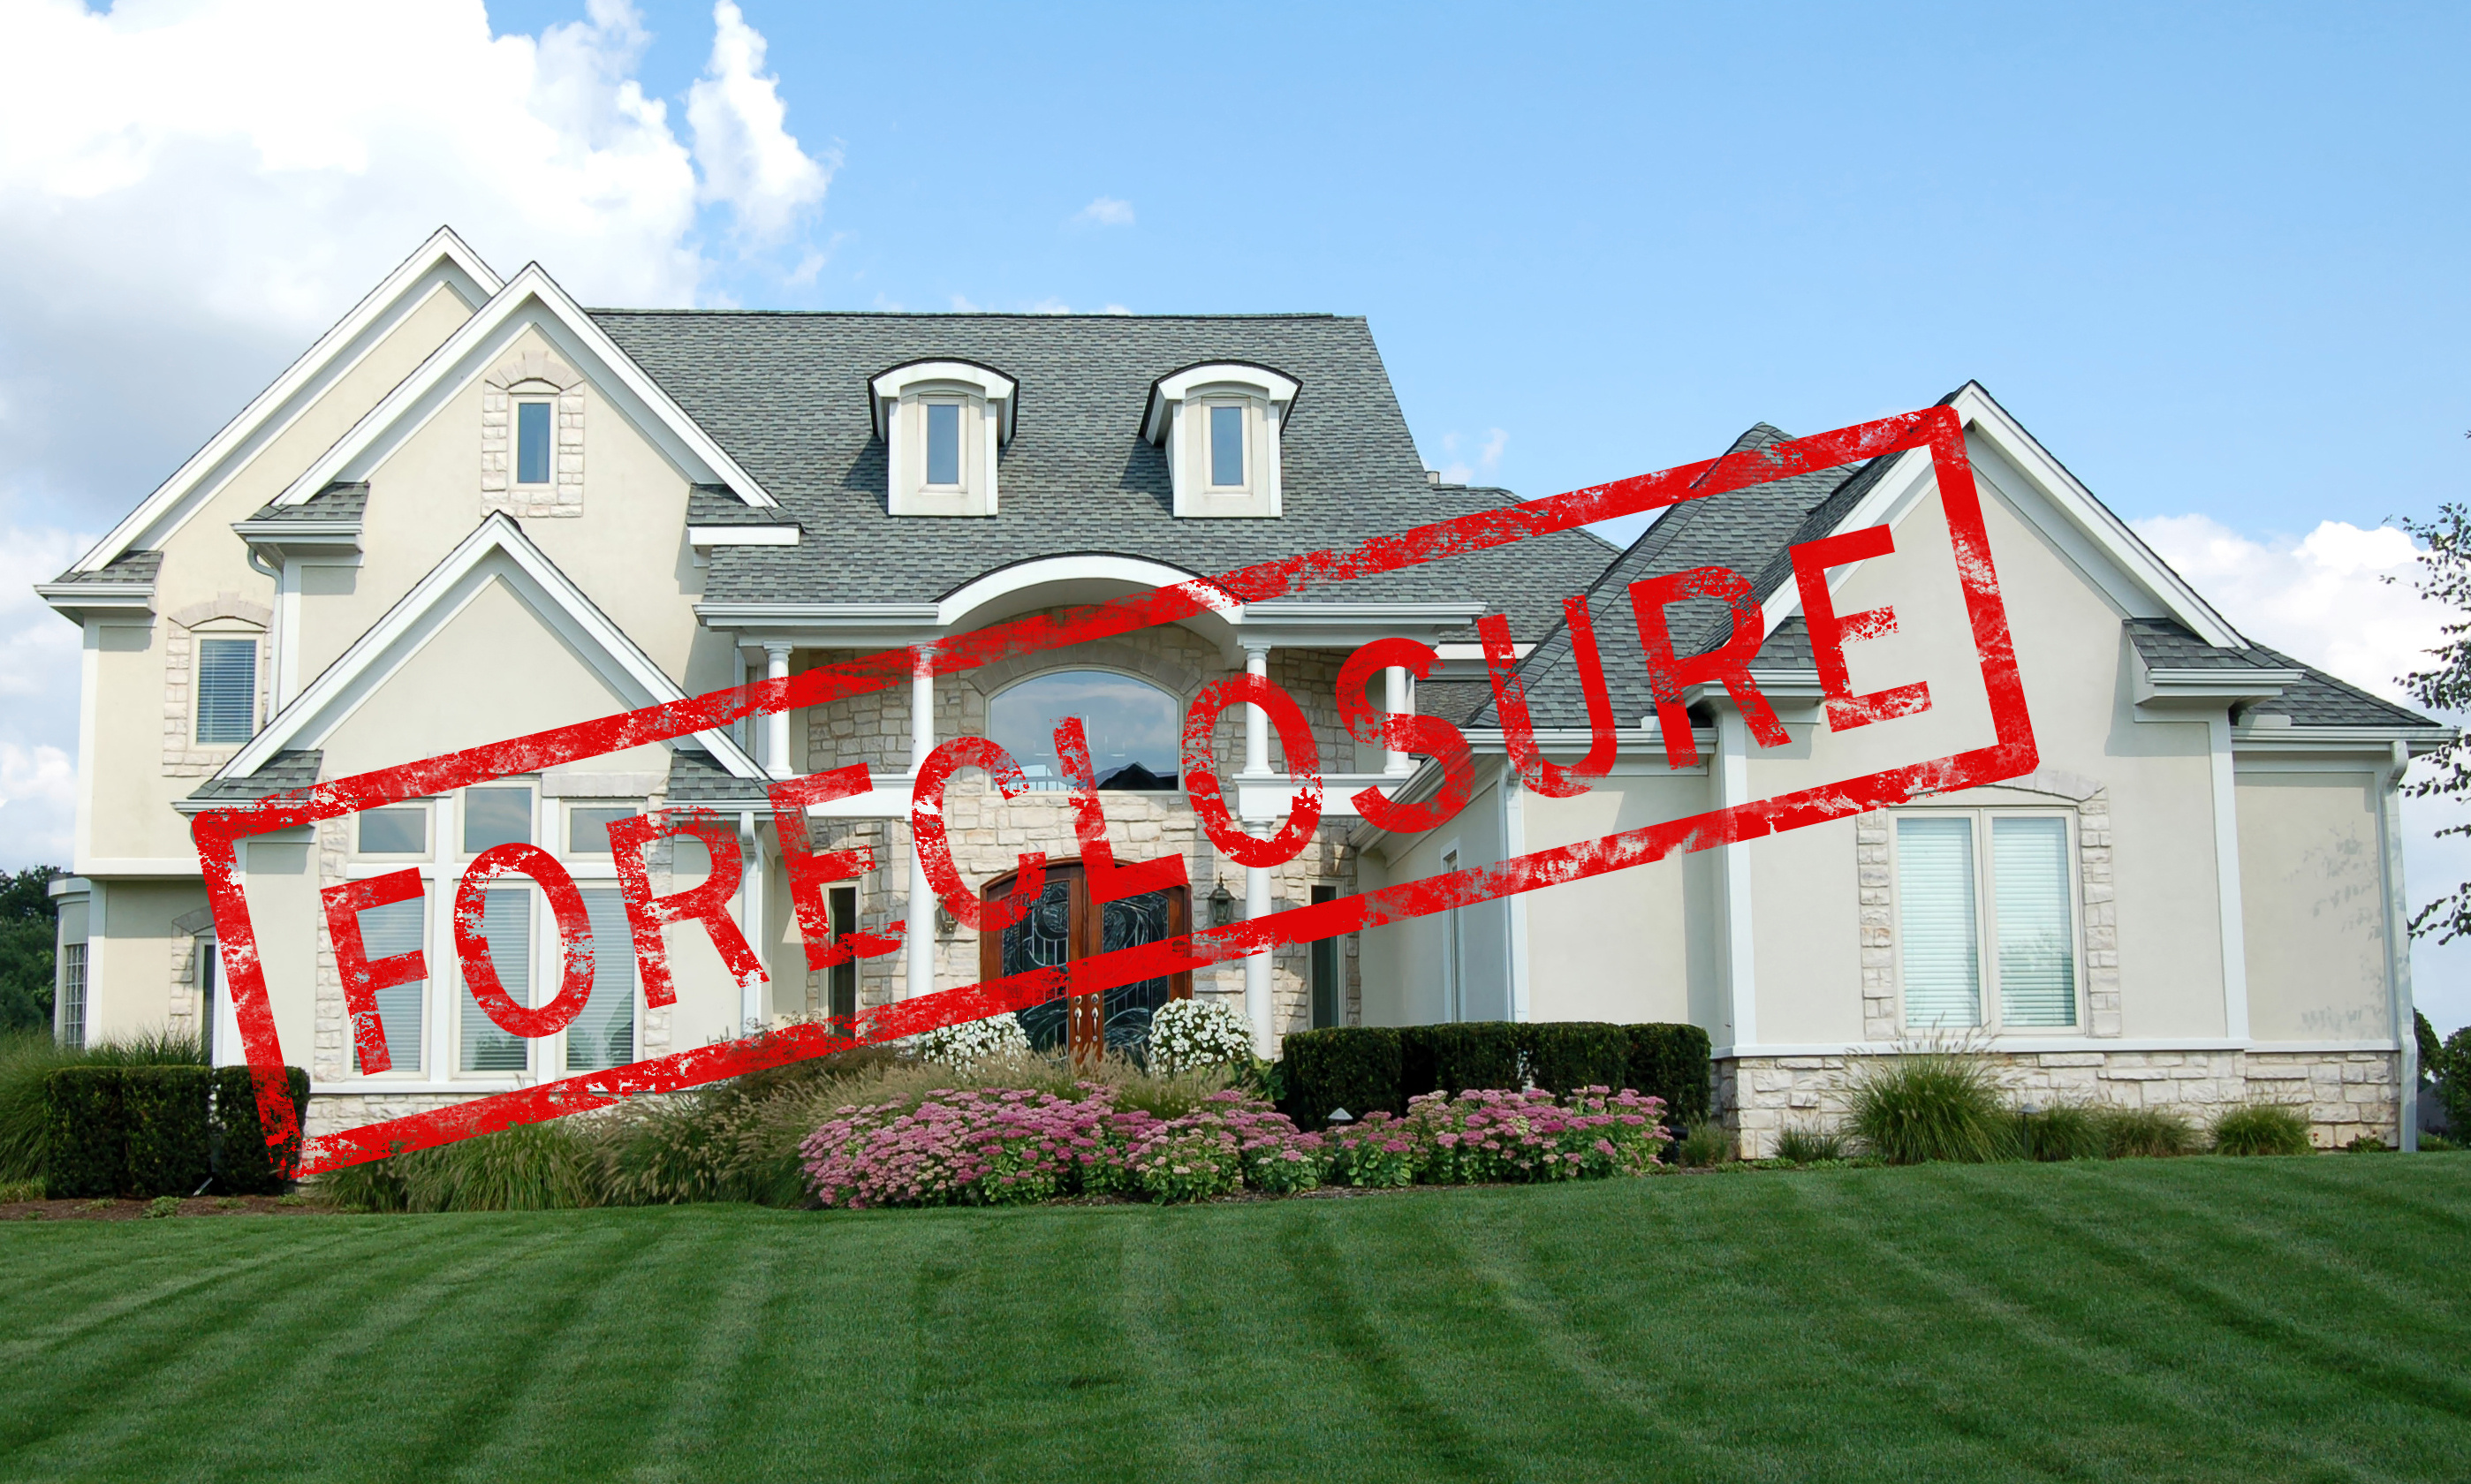 Call JM Real Estate Service to discuss valuations regarding Cook foreclosures